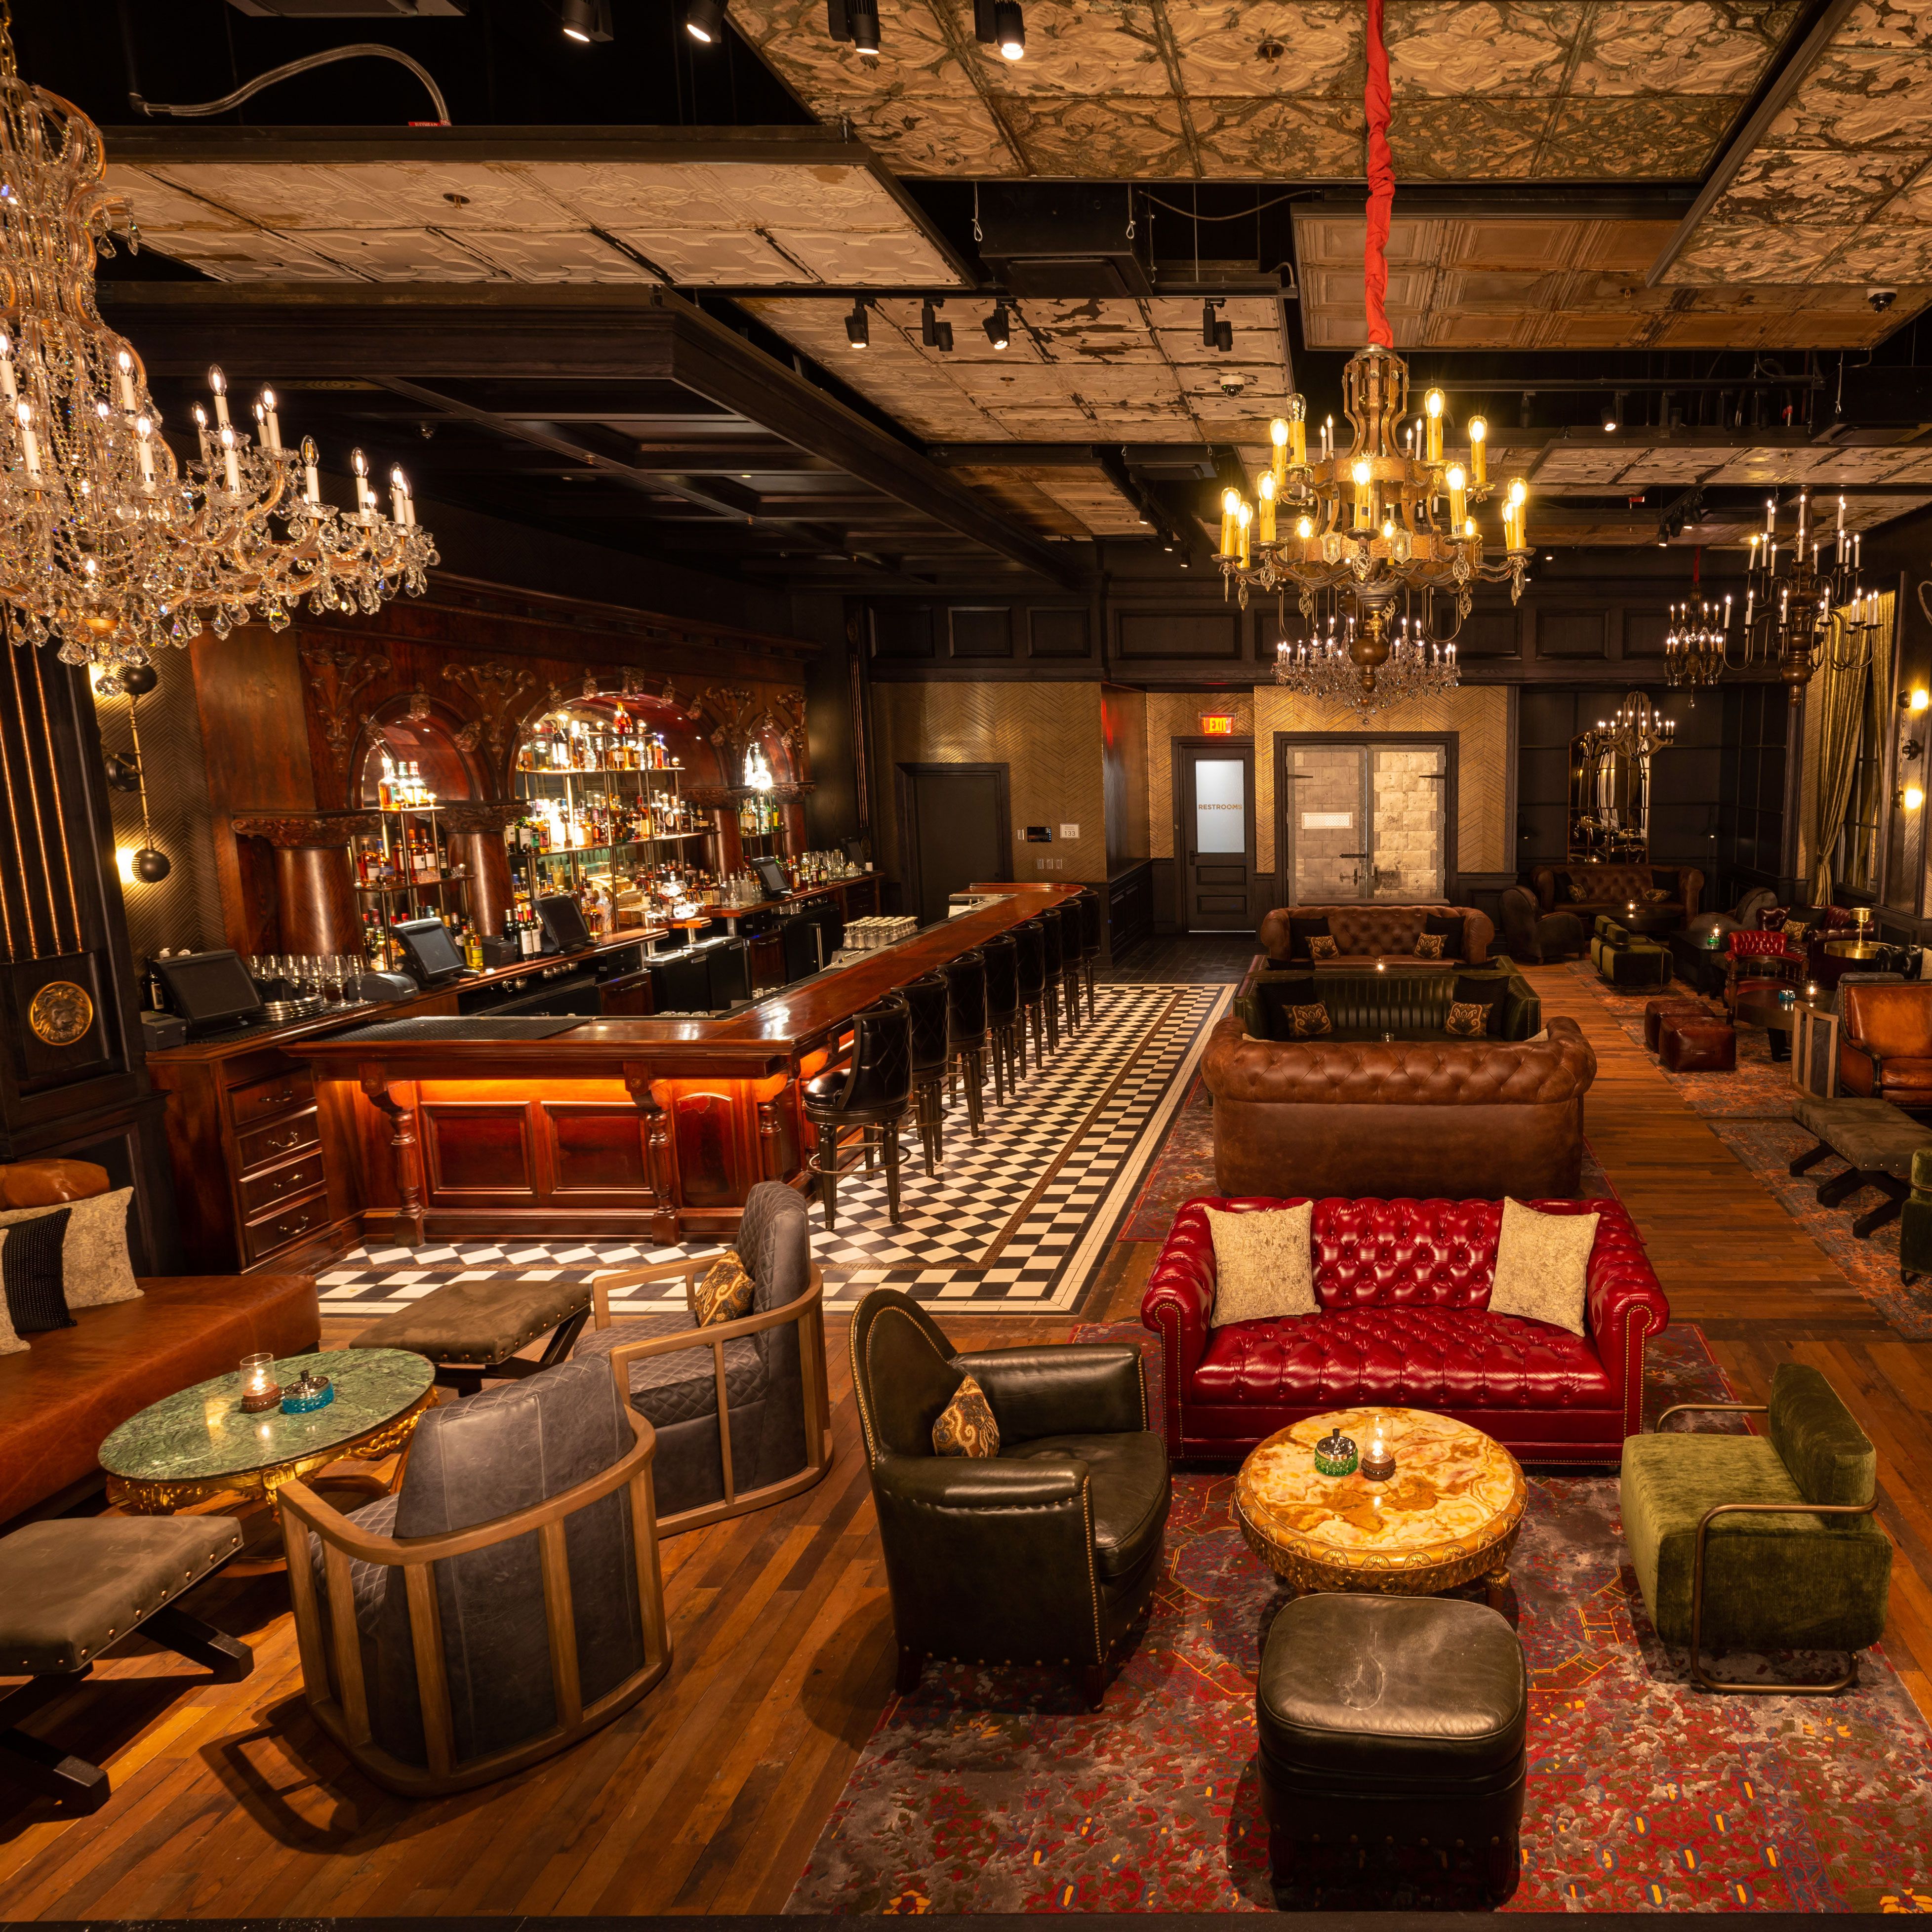 The Barbershop Cuts & Cocktails reveals its speakeasy space - Eater Vegas